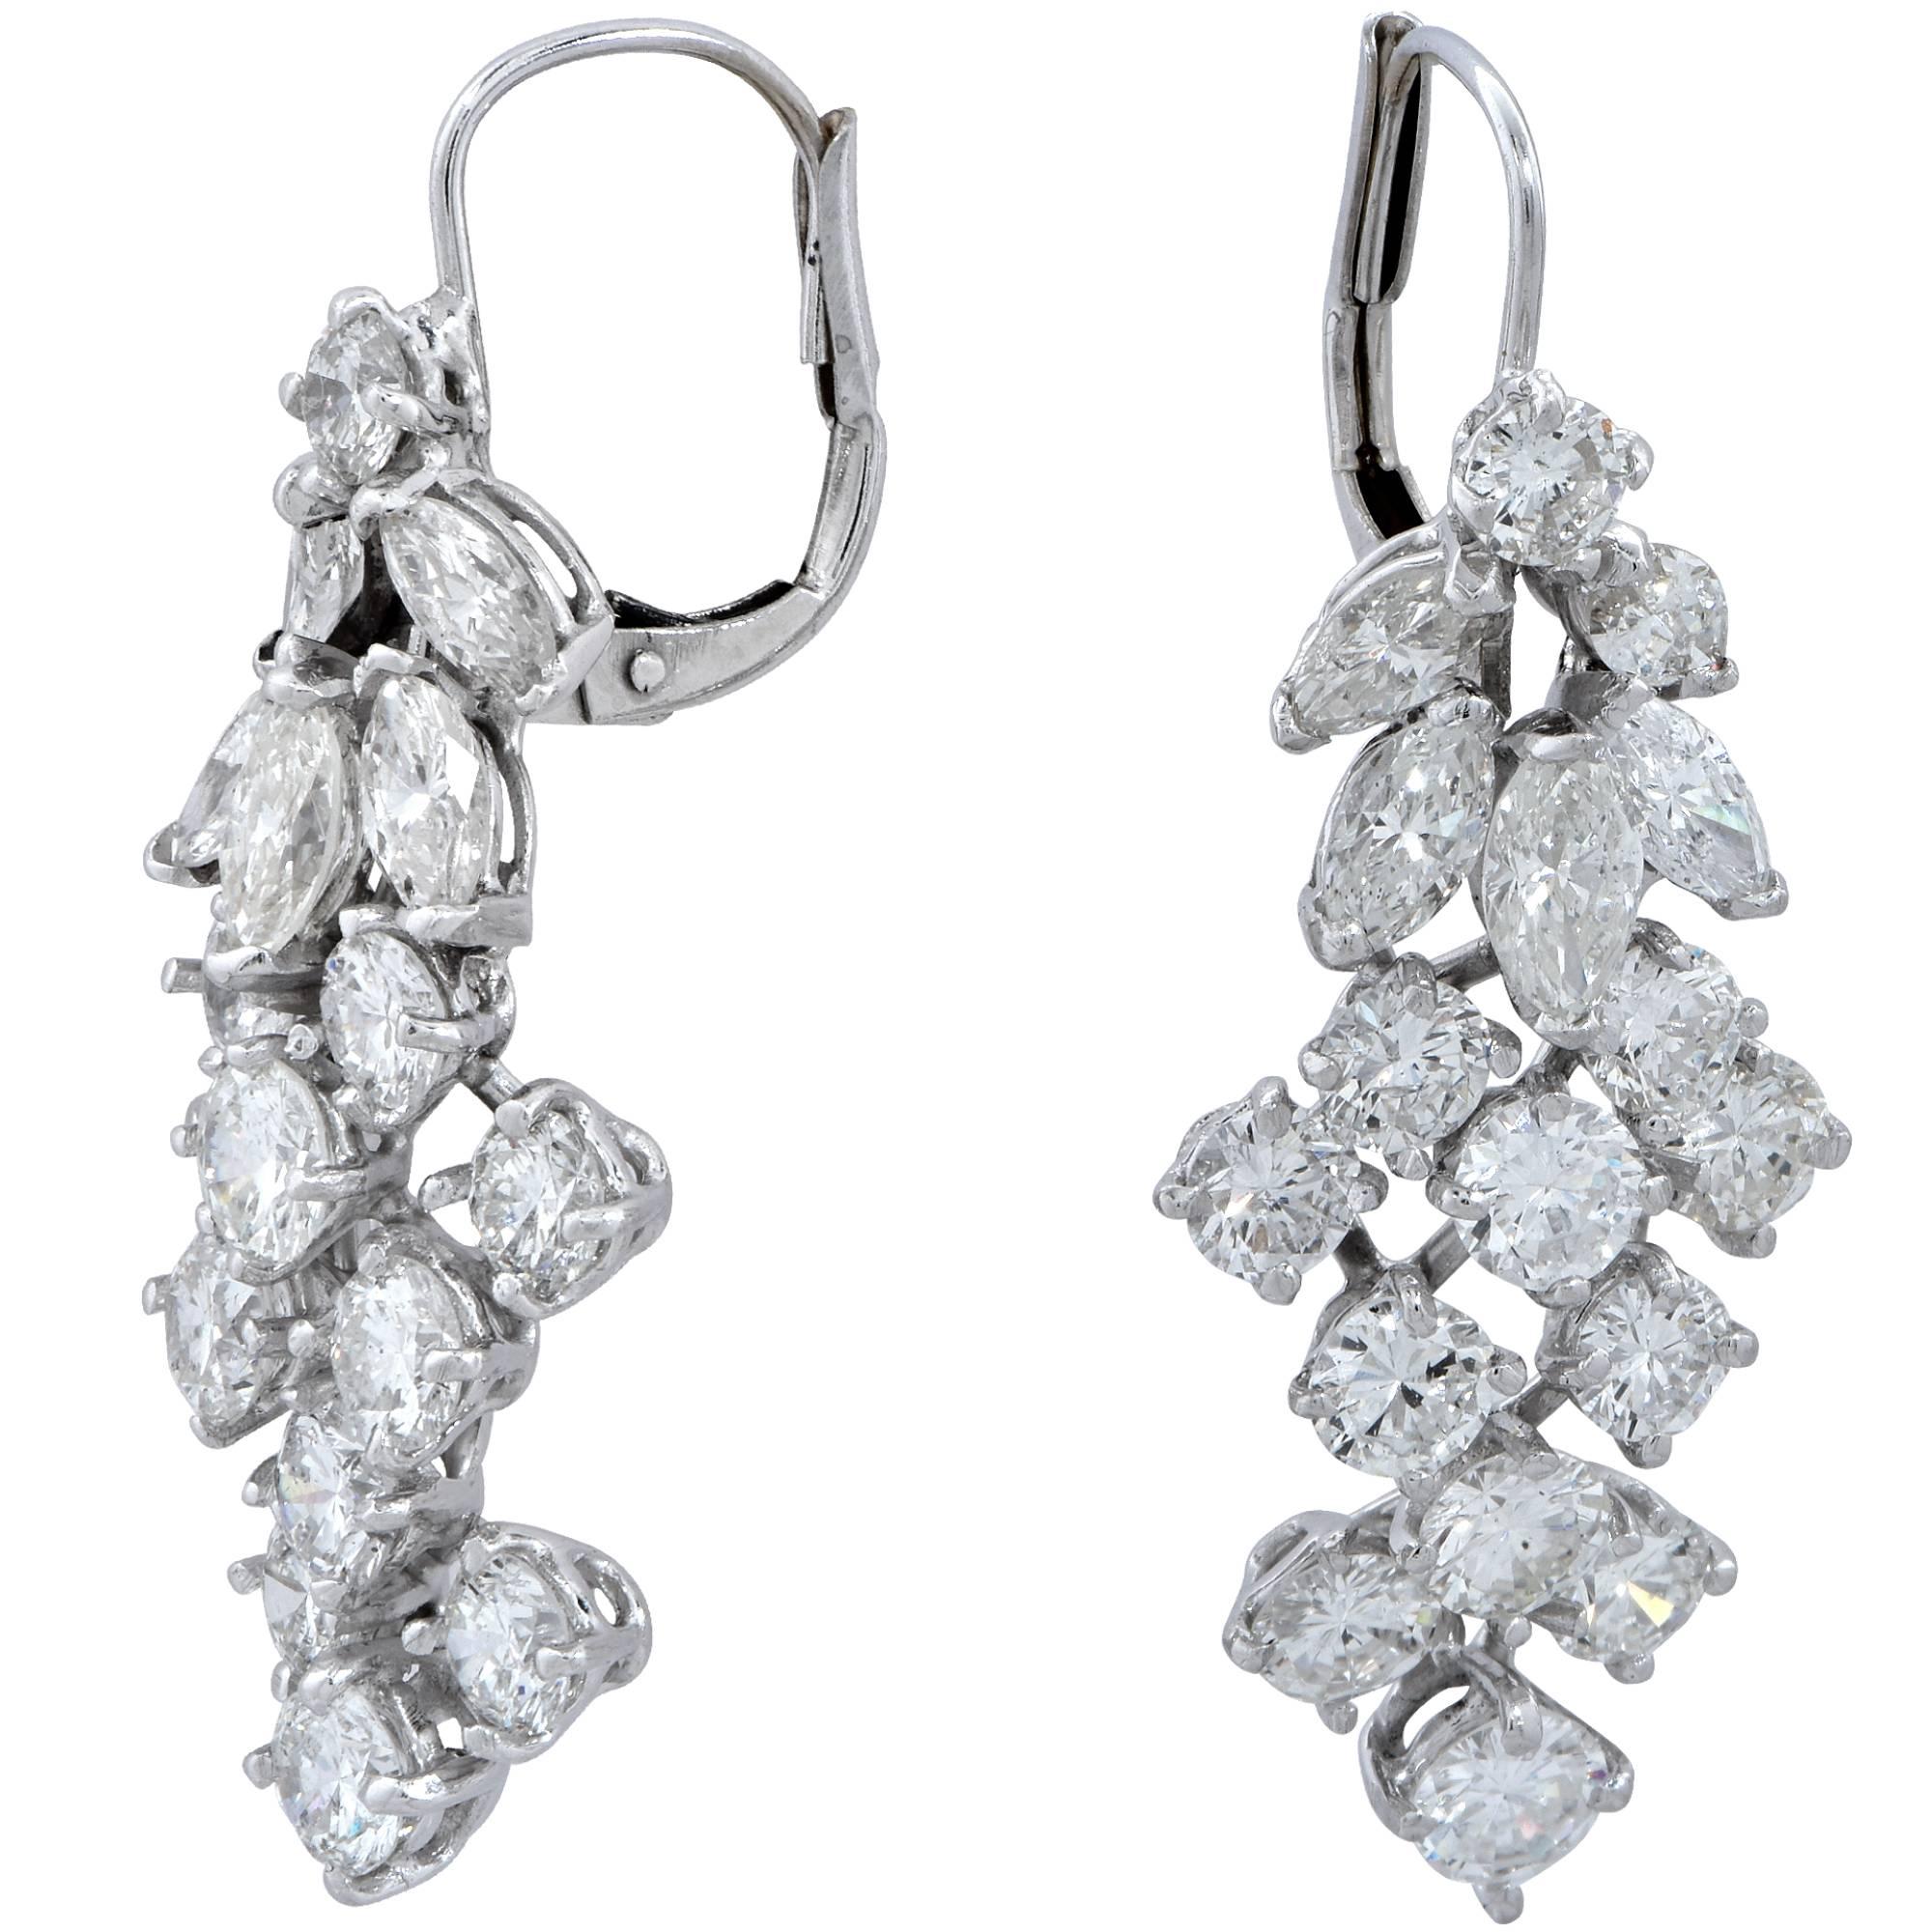 White gold earrings containing 34 round brilliant and marquise cut diamonds weighing approximately 5cts G-I color and VS clarity.

These earrings measure 1.25 inches in length by .50 inch in width.
It is stamped and/or tested as 18k gold.
The metal